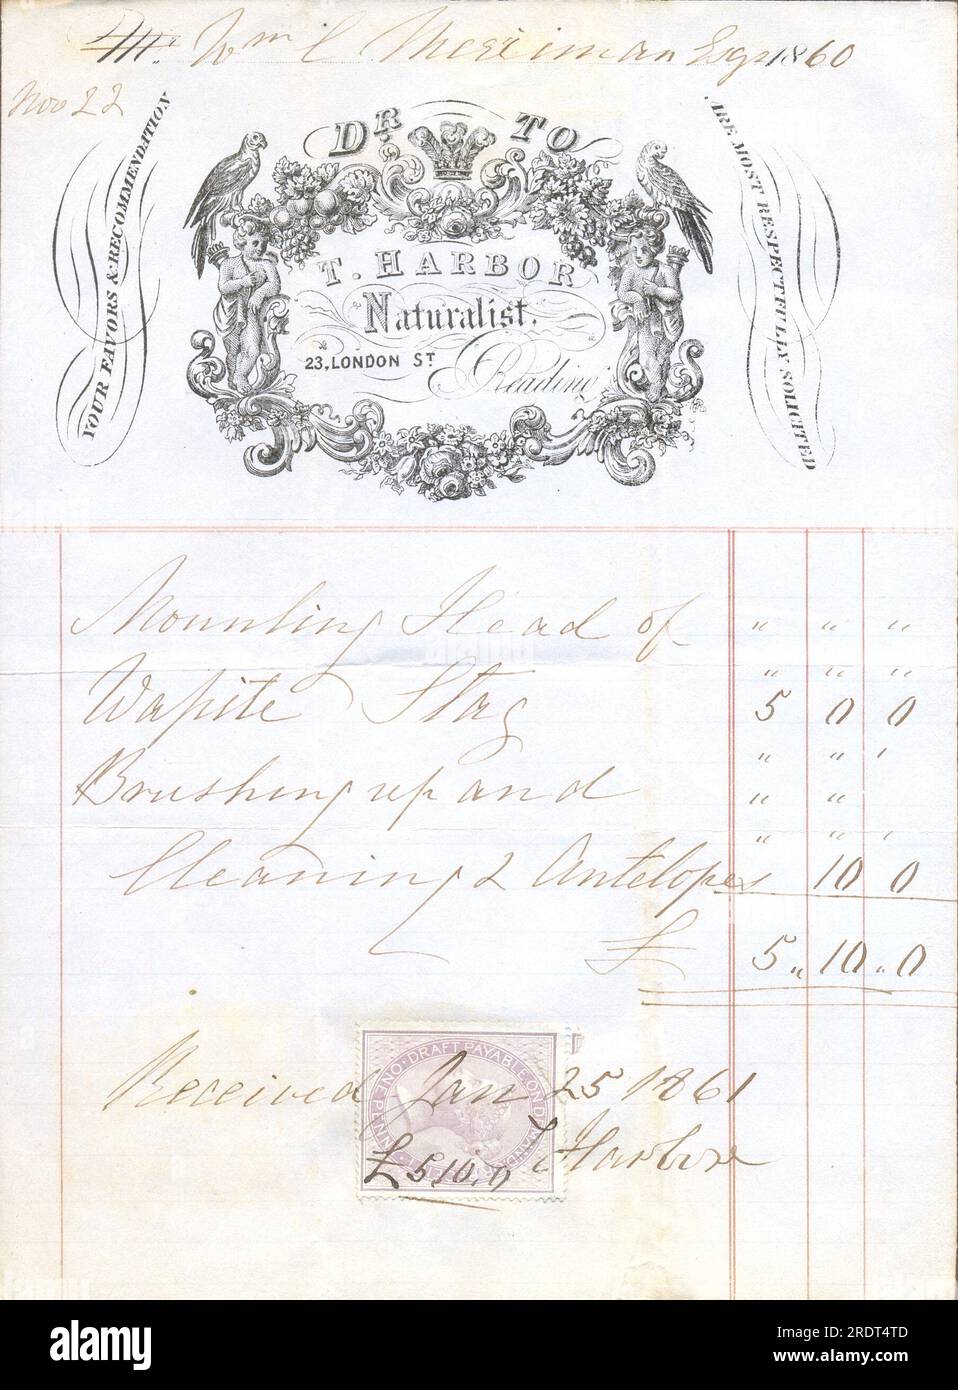 Receipted Invoice for T. Harbor,  Naturalist, 23 London Street, Reading [Berkshire]1861 Stock Photo